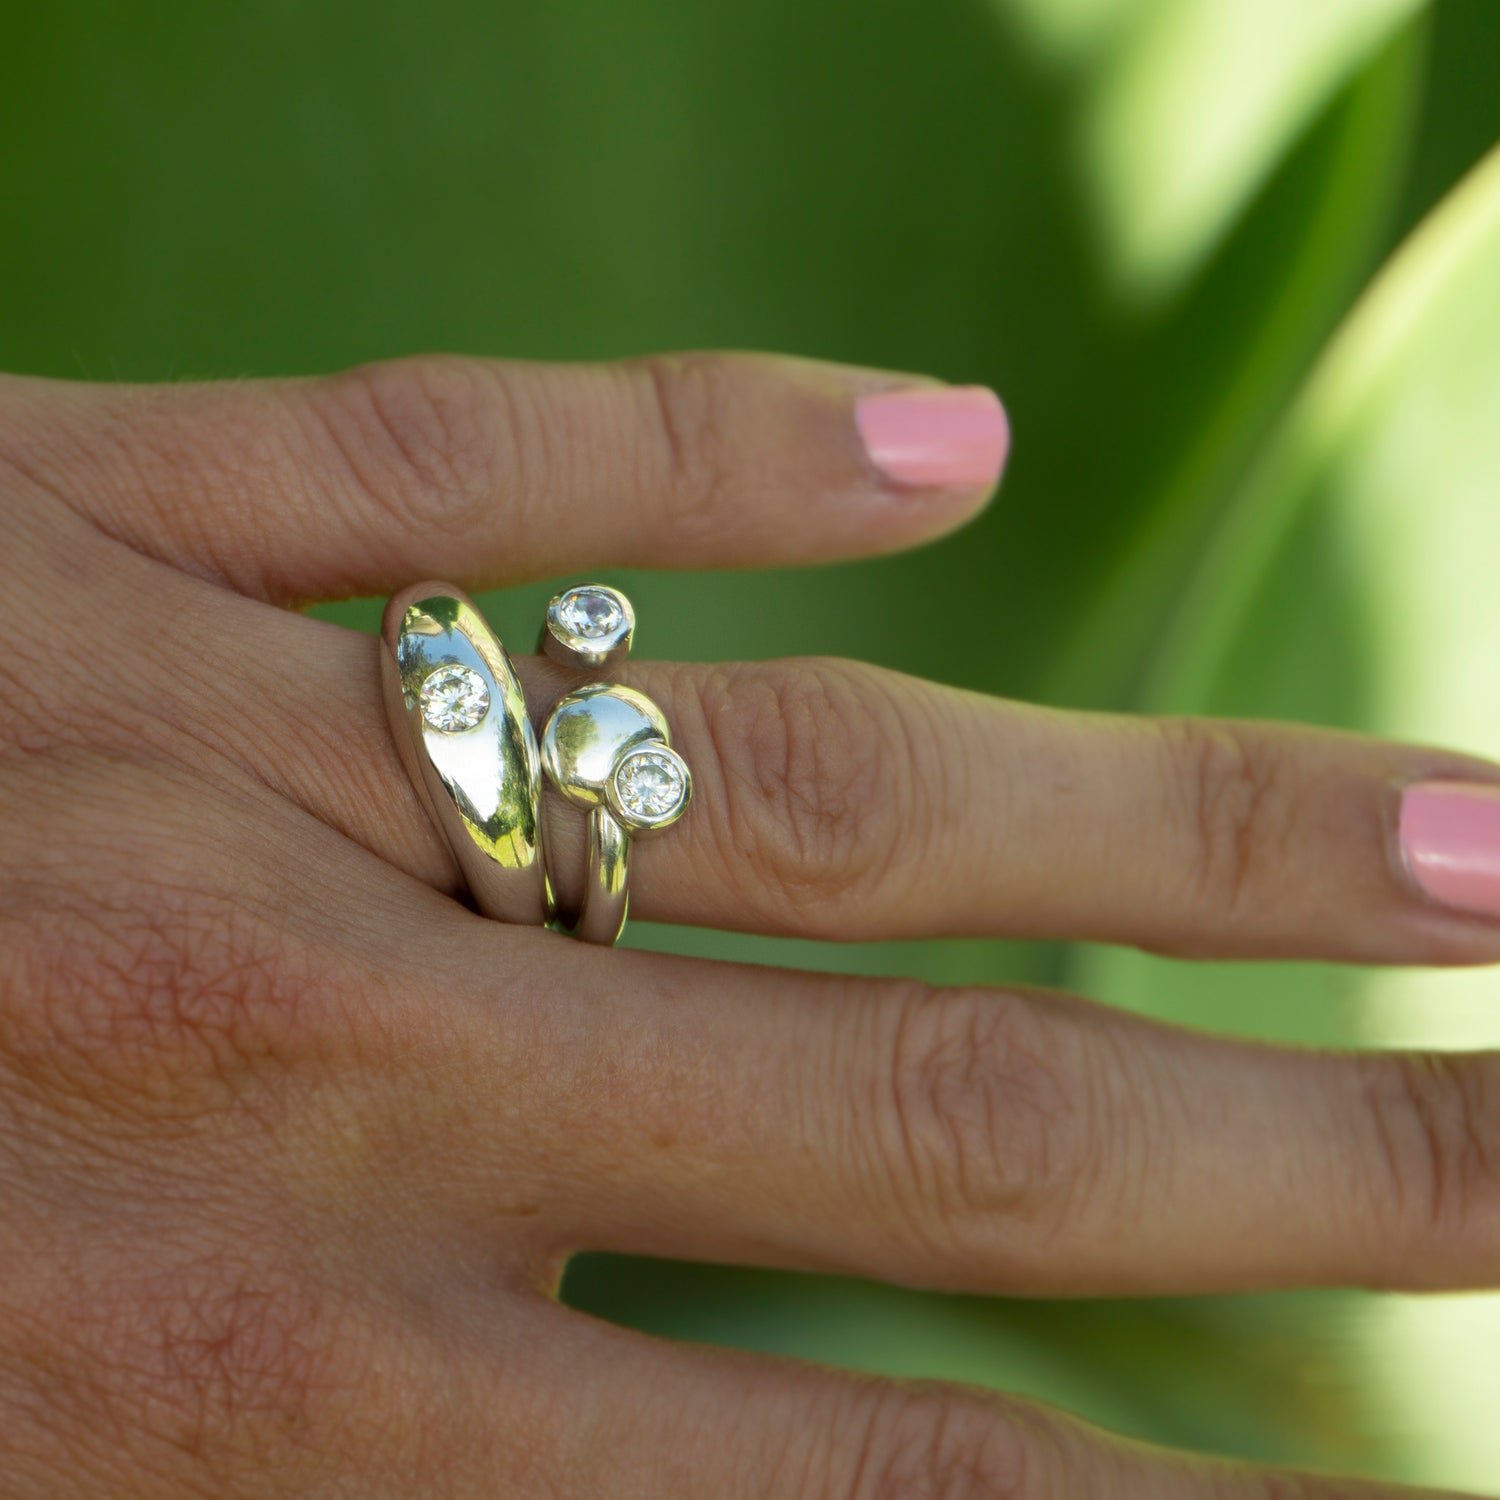 Two solid gold diamond rings stacked on finger - AïANA